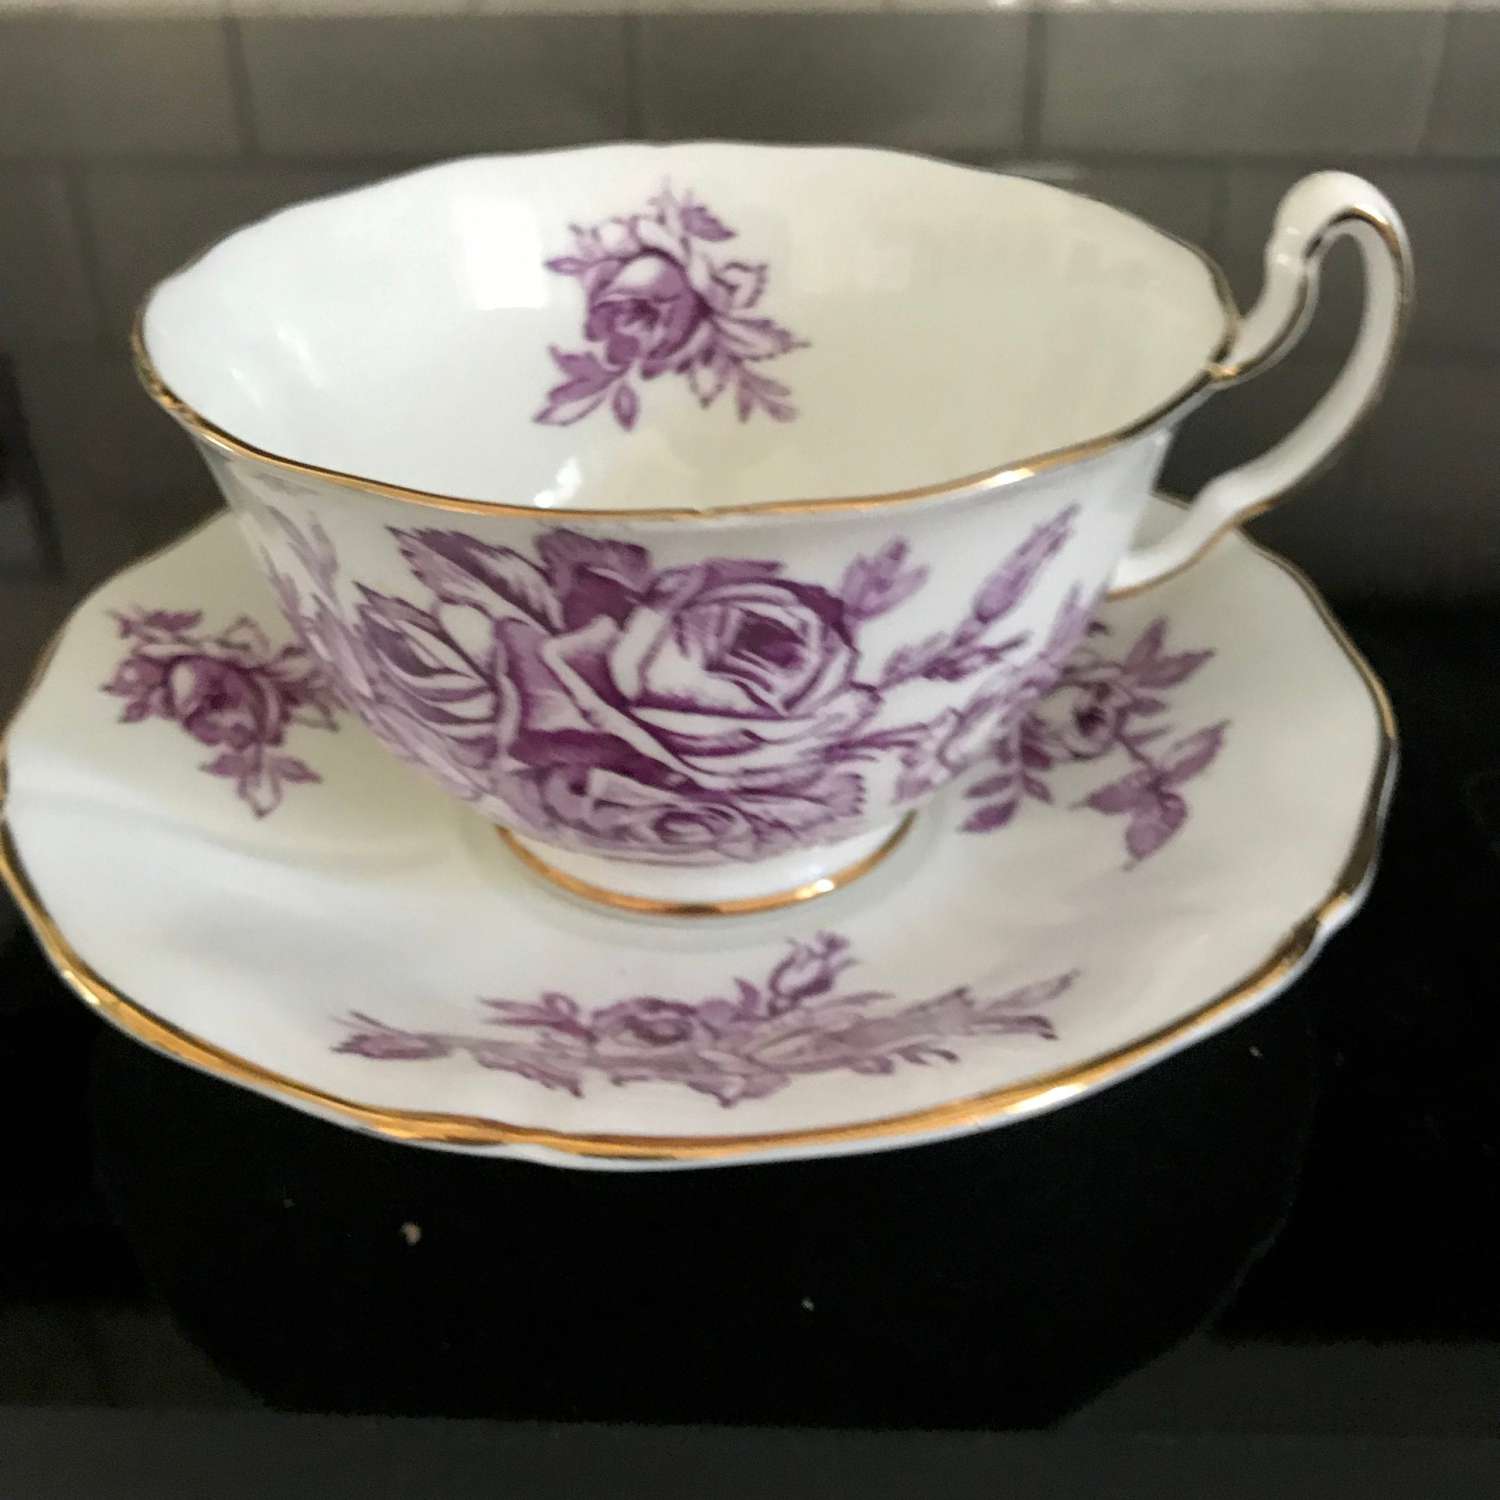 https://www.truevintageantiques.com/wp-content/uploads/2019/12/adderley-tea-cup-and-saucer-england-rare-fine-bone-china-purple-rose-outlines-gold-trim-farmhouse-collectible-display-coffee-dining-5e04f6941-scaled.jpg